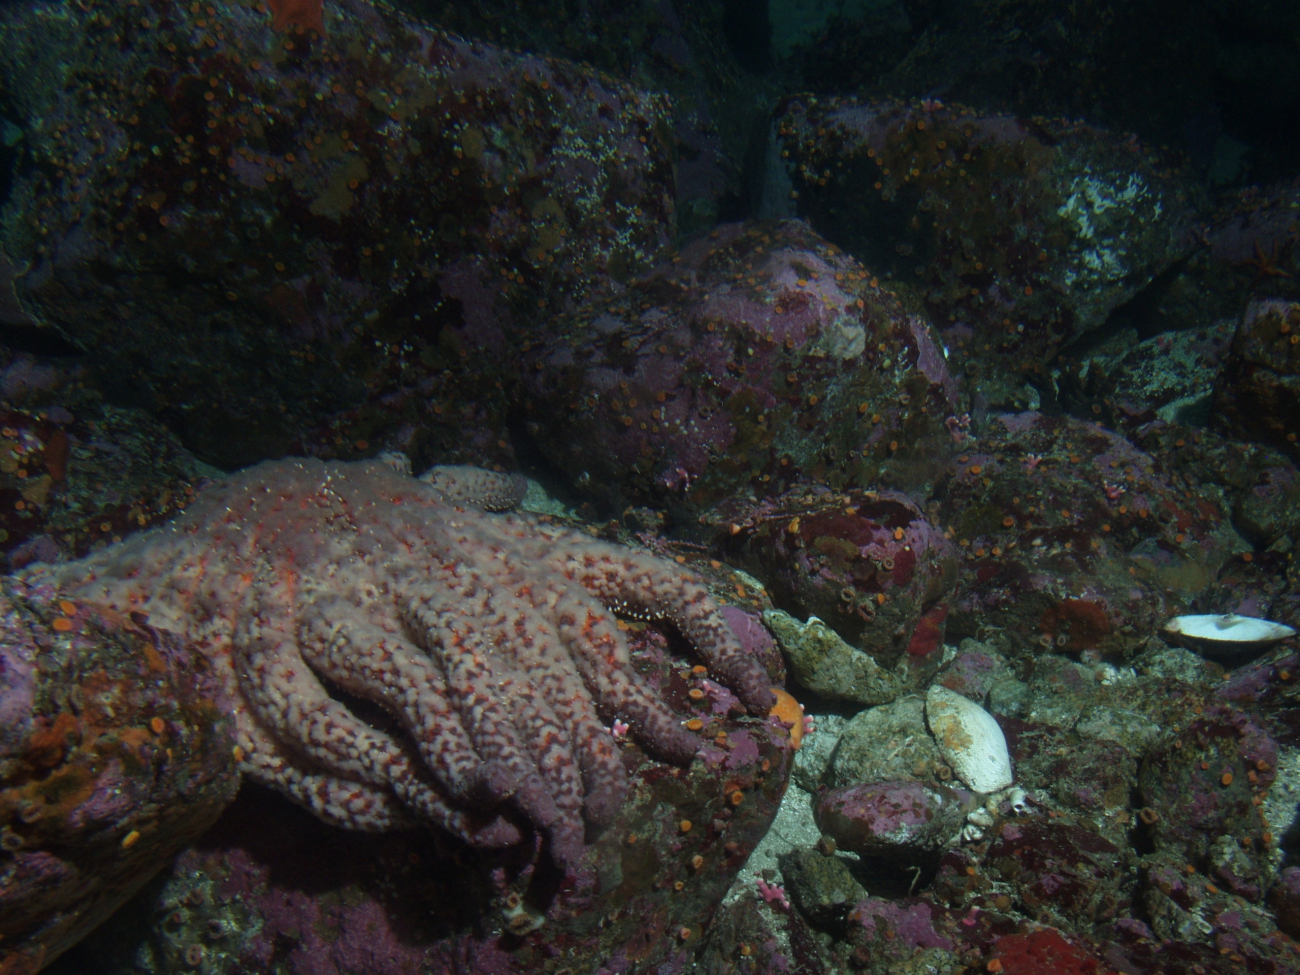 Sunflower sea star (Pycnopodia helianthoides) and shell hashin sandy boulder habitat at 30 meters depth